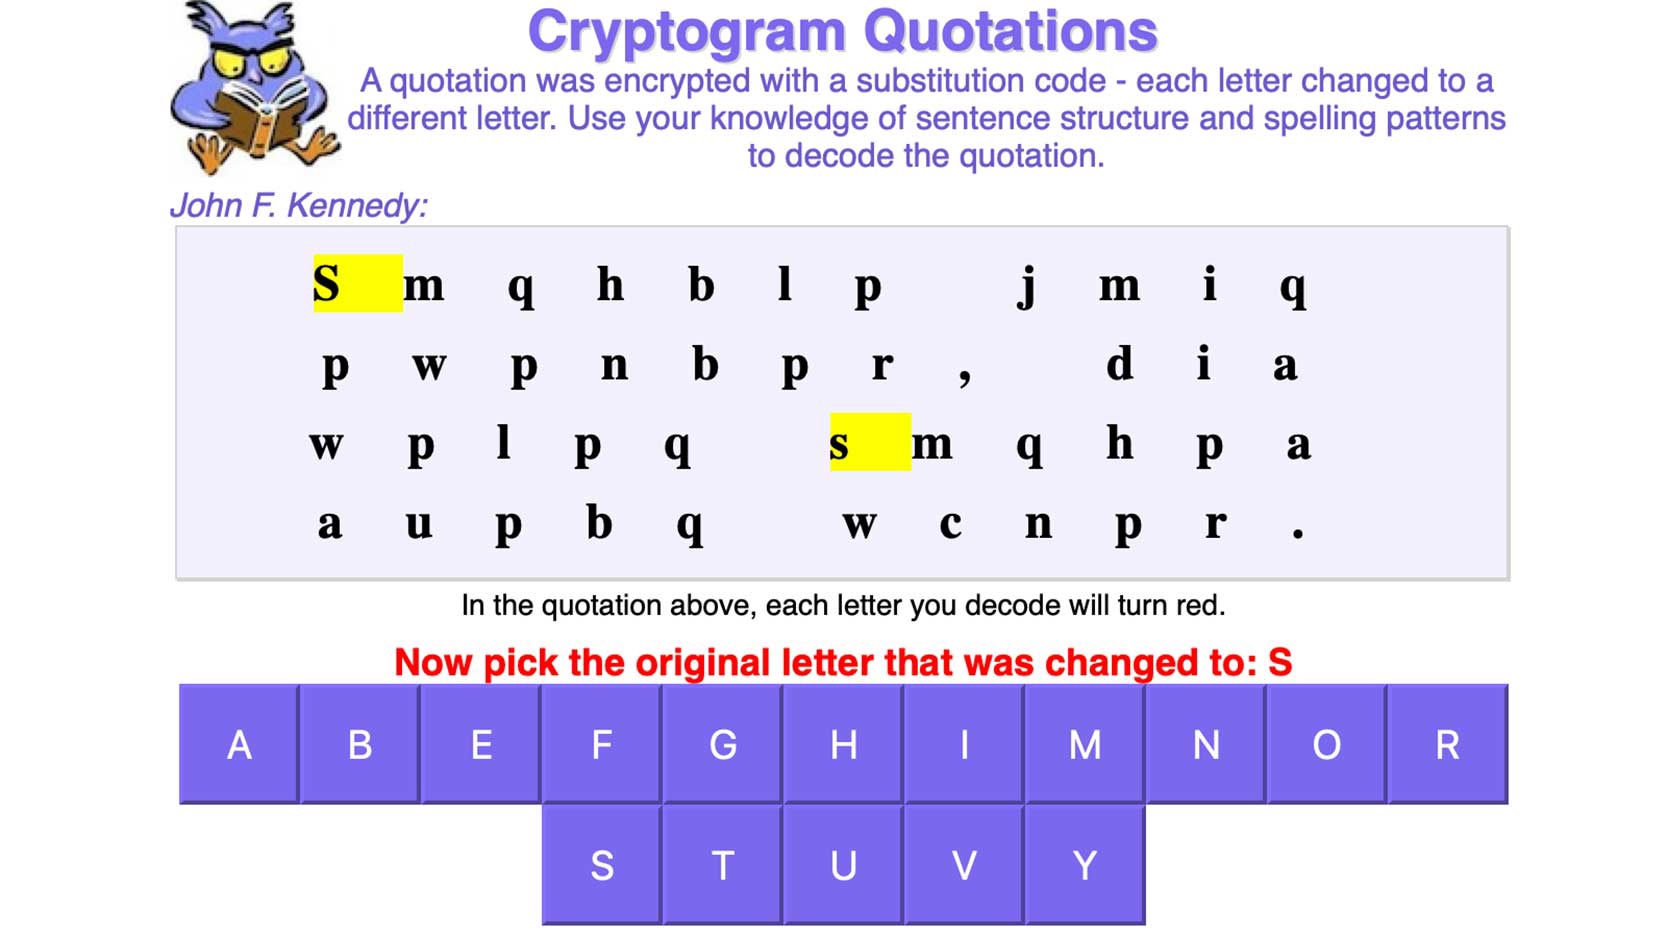 cryptogram quotations online word game